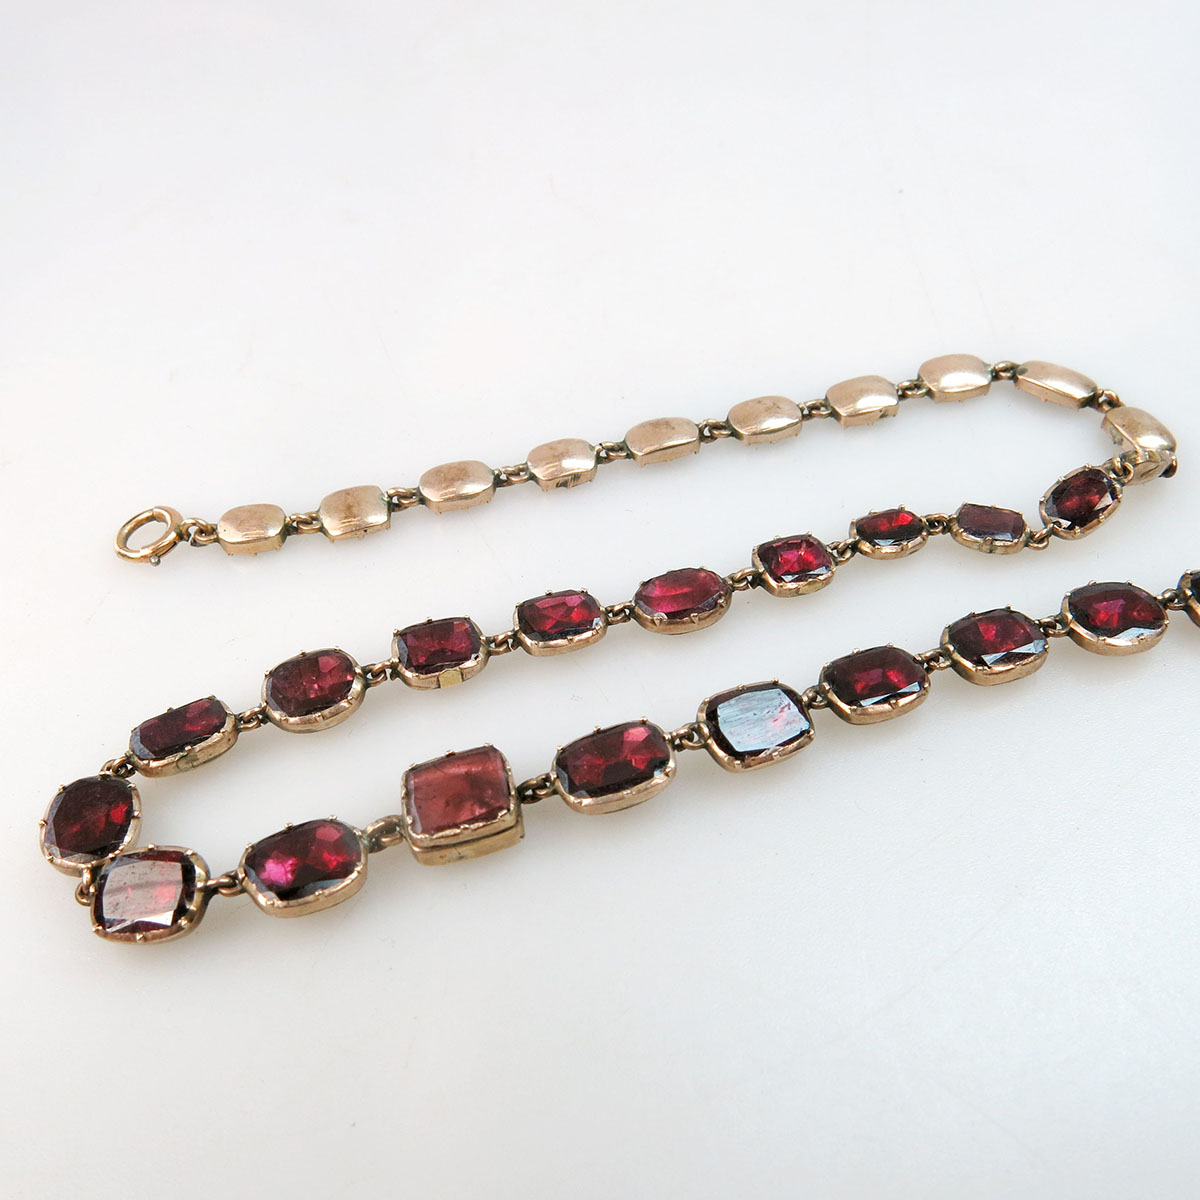 9k Rose Gold And Gold-Filled Necklace